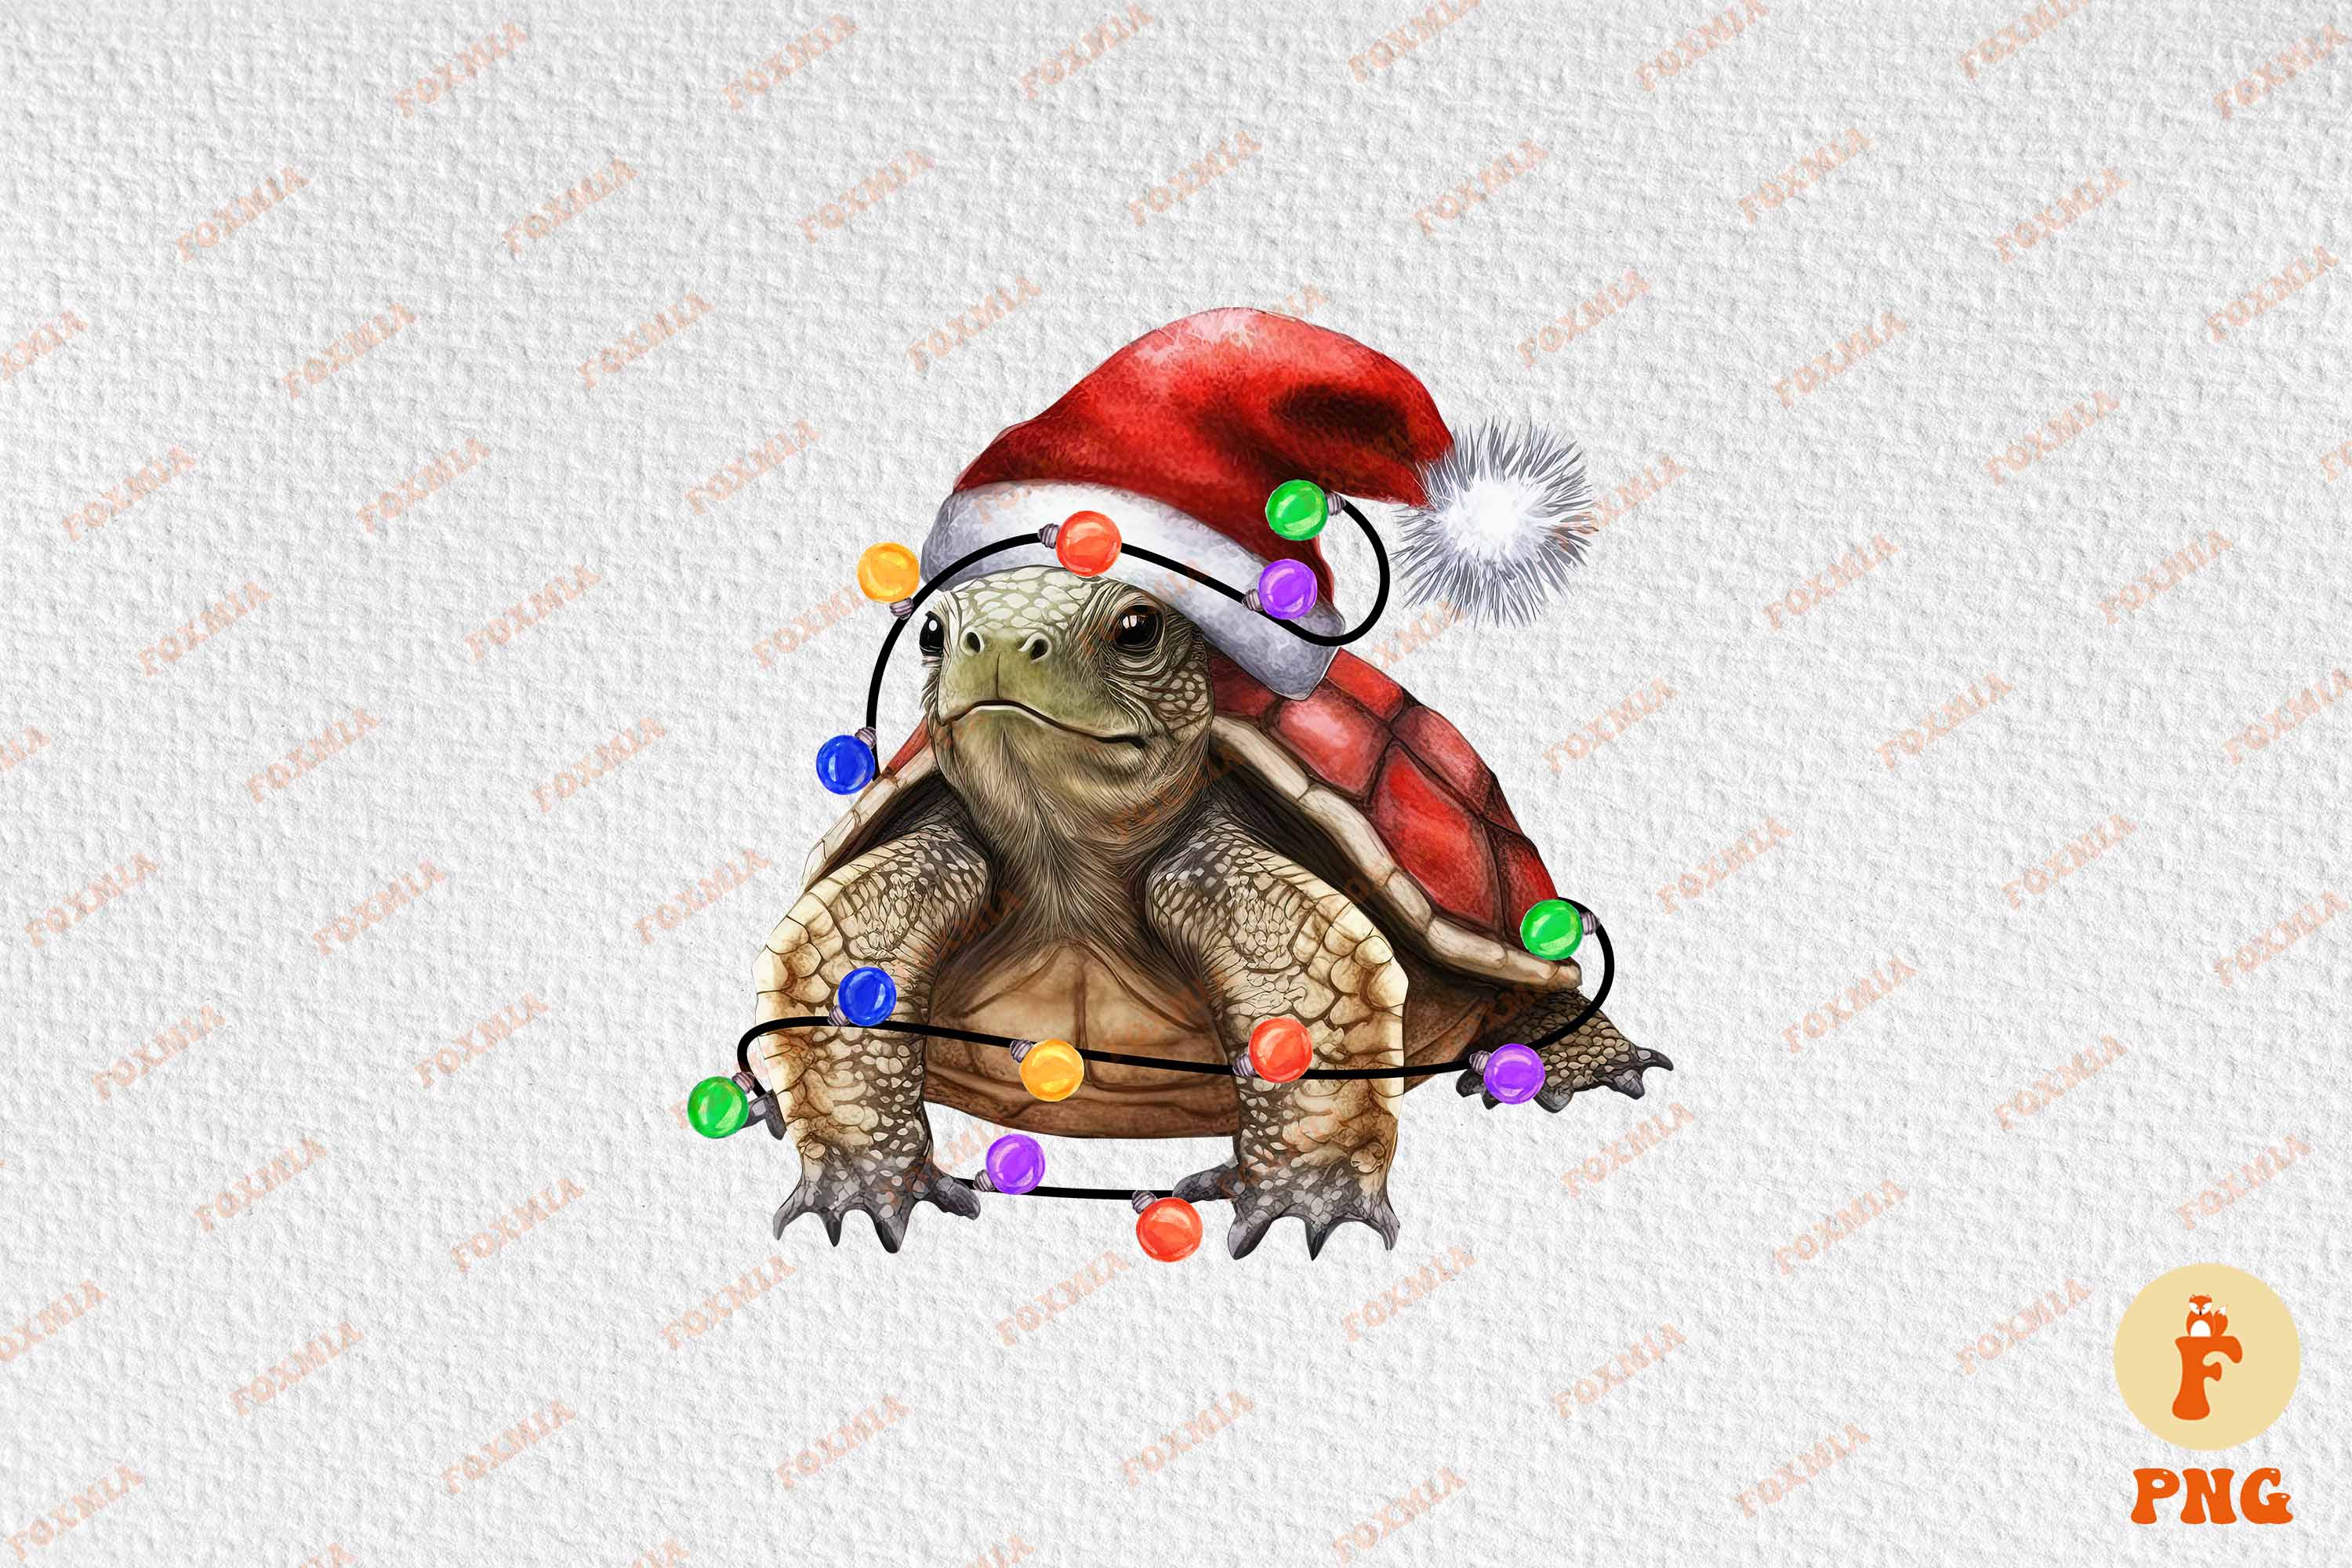 Exquisite image of a turtle wearing a santa hat.